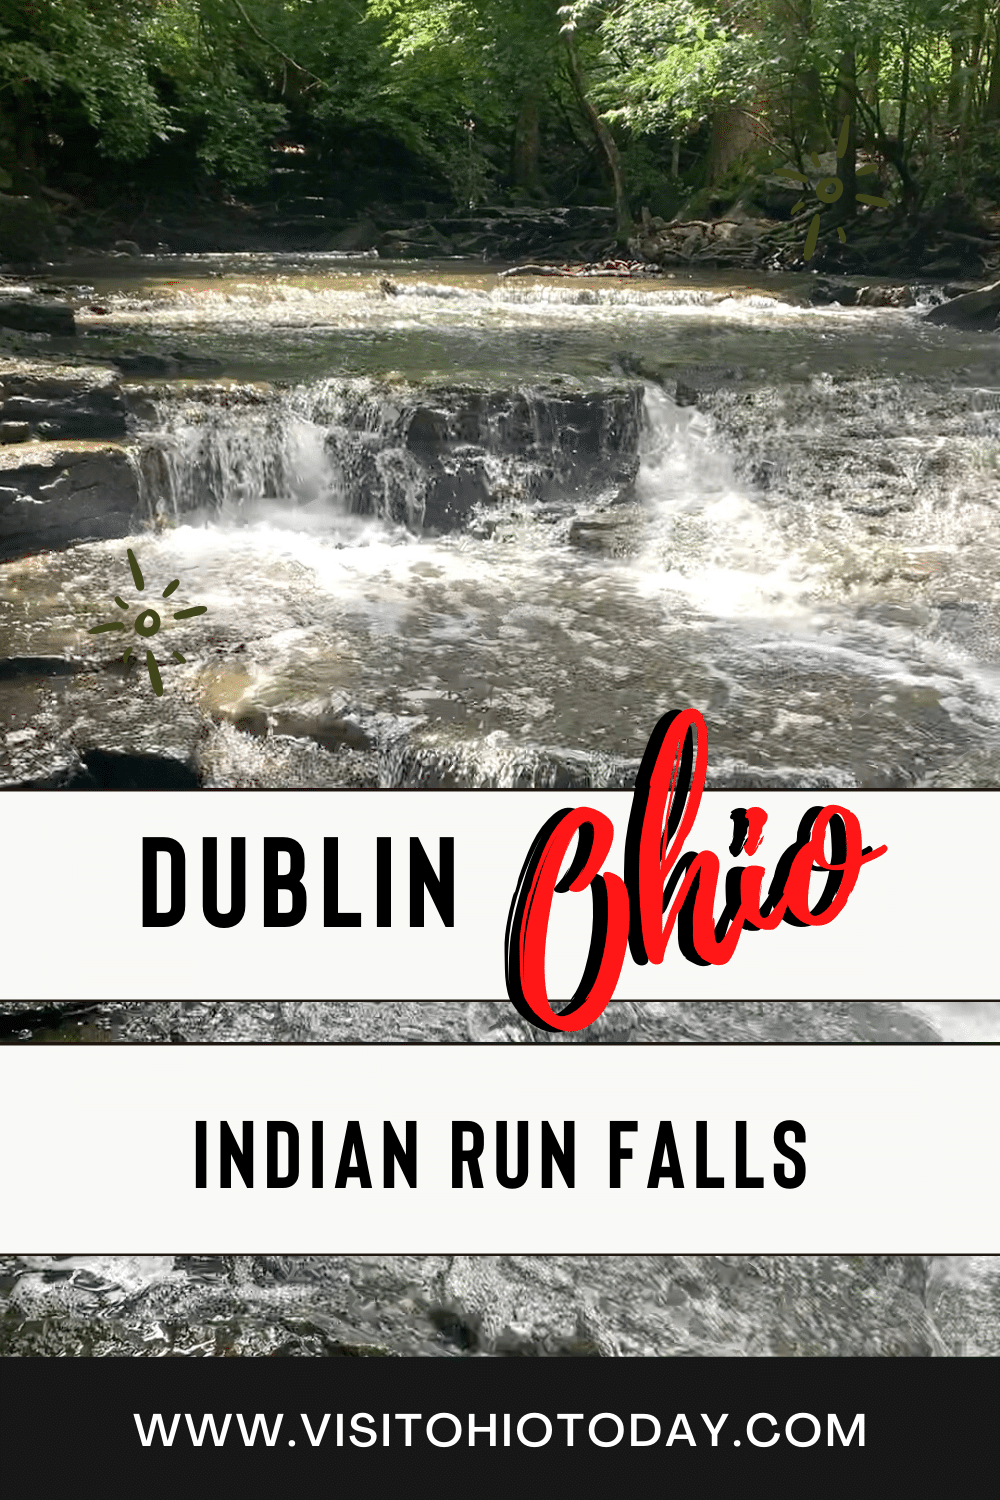 Indian Run Falls is a hidden gem located in Dublin, Ohio. The site features beautiful stream, cascades and waterfall. #dublinohio #waterfall #ohio